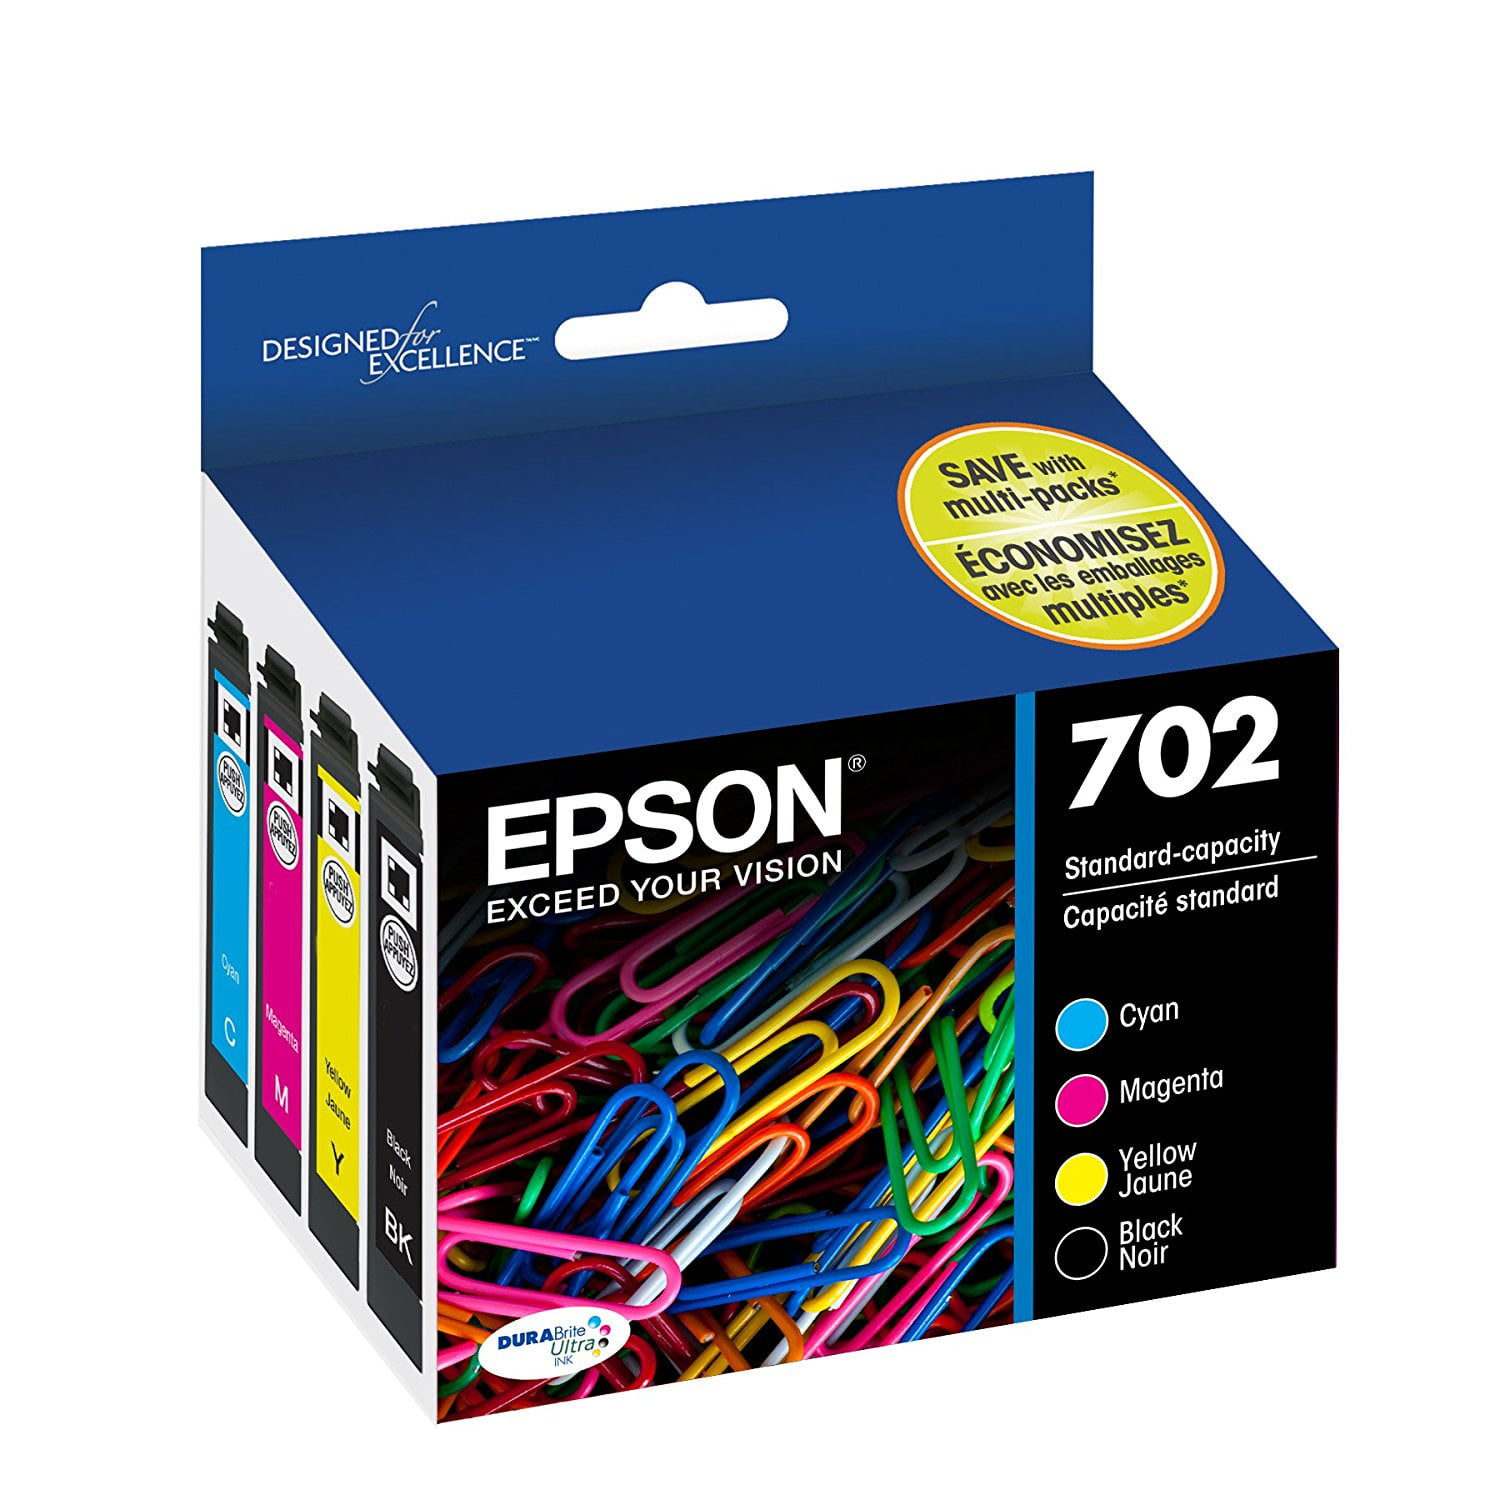 Epson 702 Standard-capacity Black/Color Combo Pack Ink Cartridge for WF